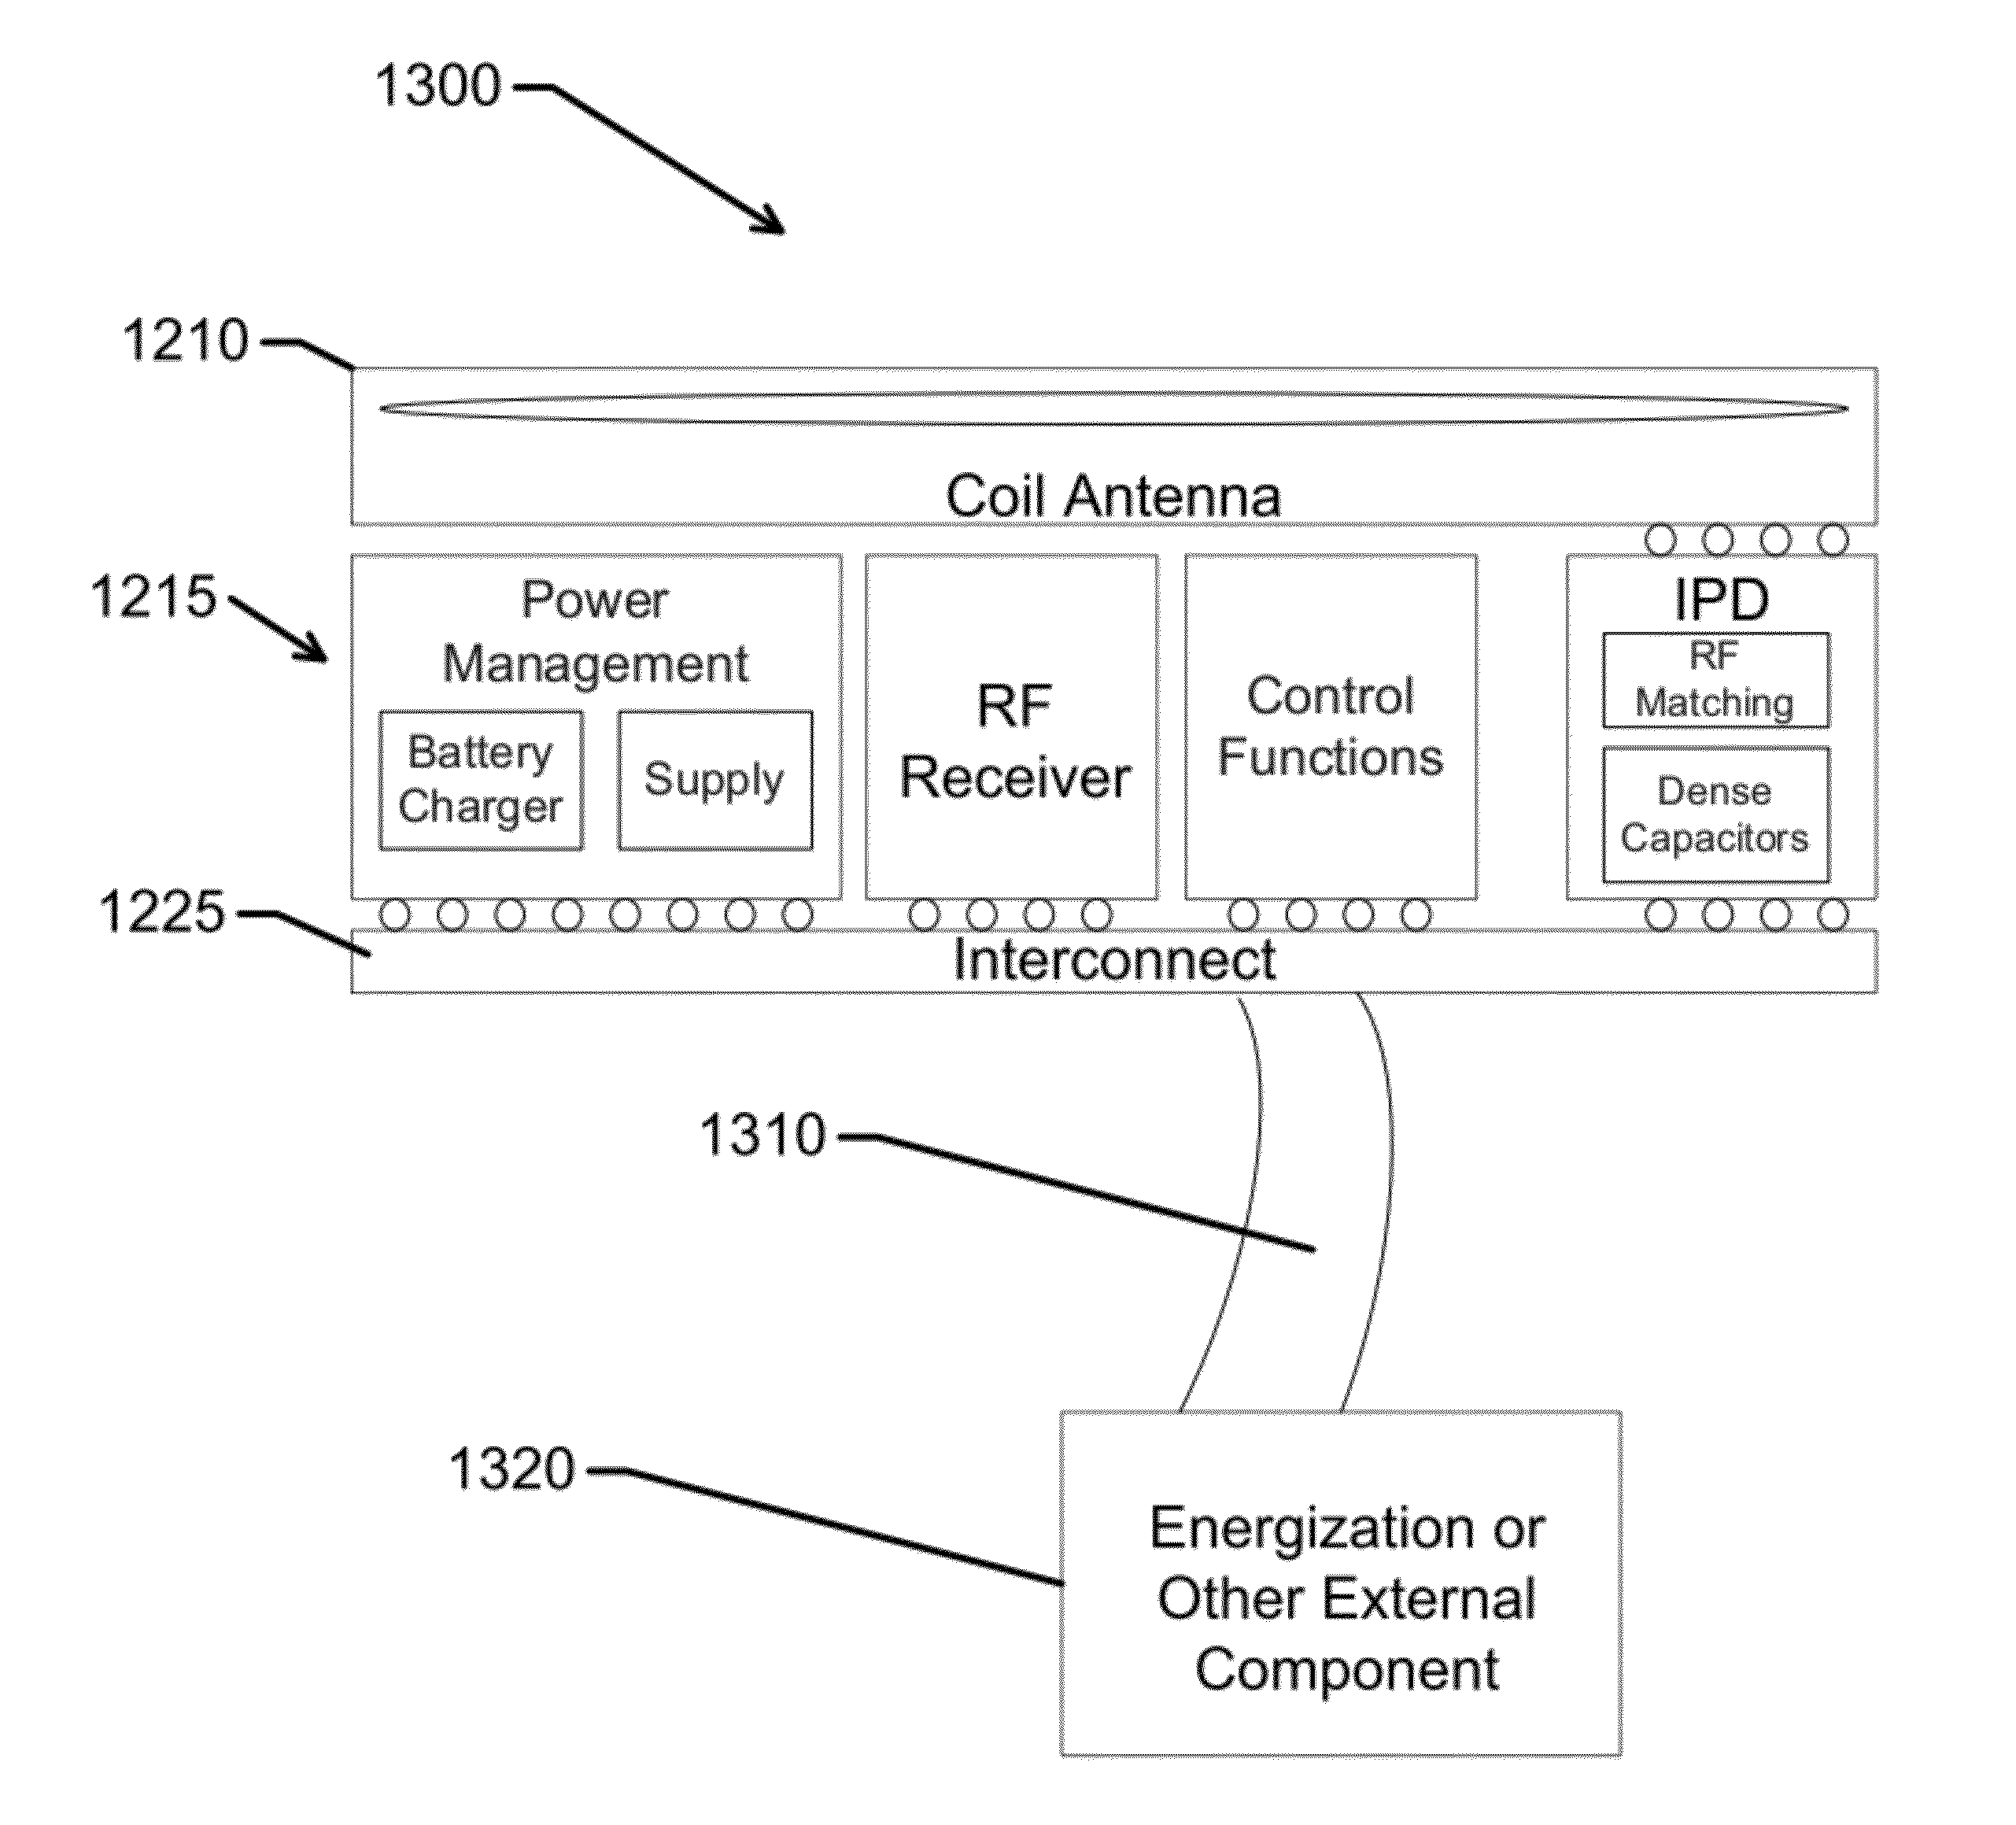 Stacked integrated component devices with energization